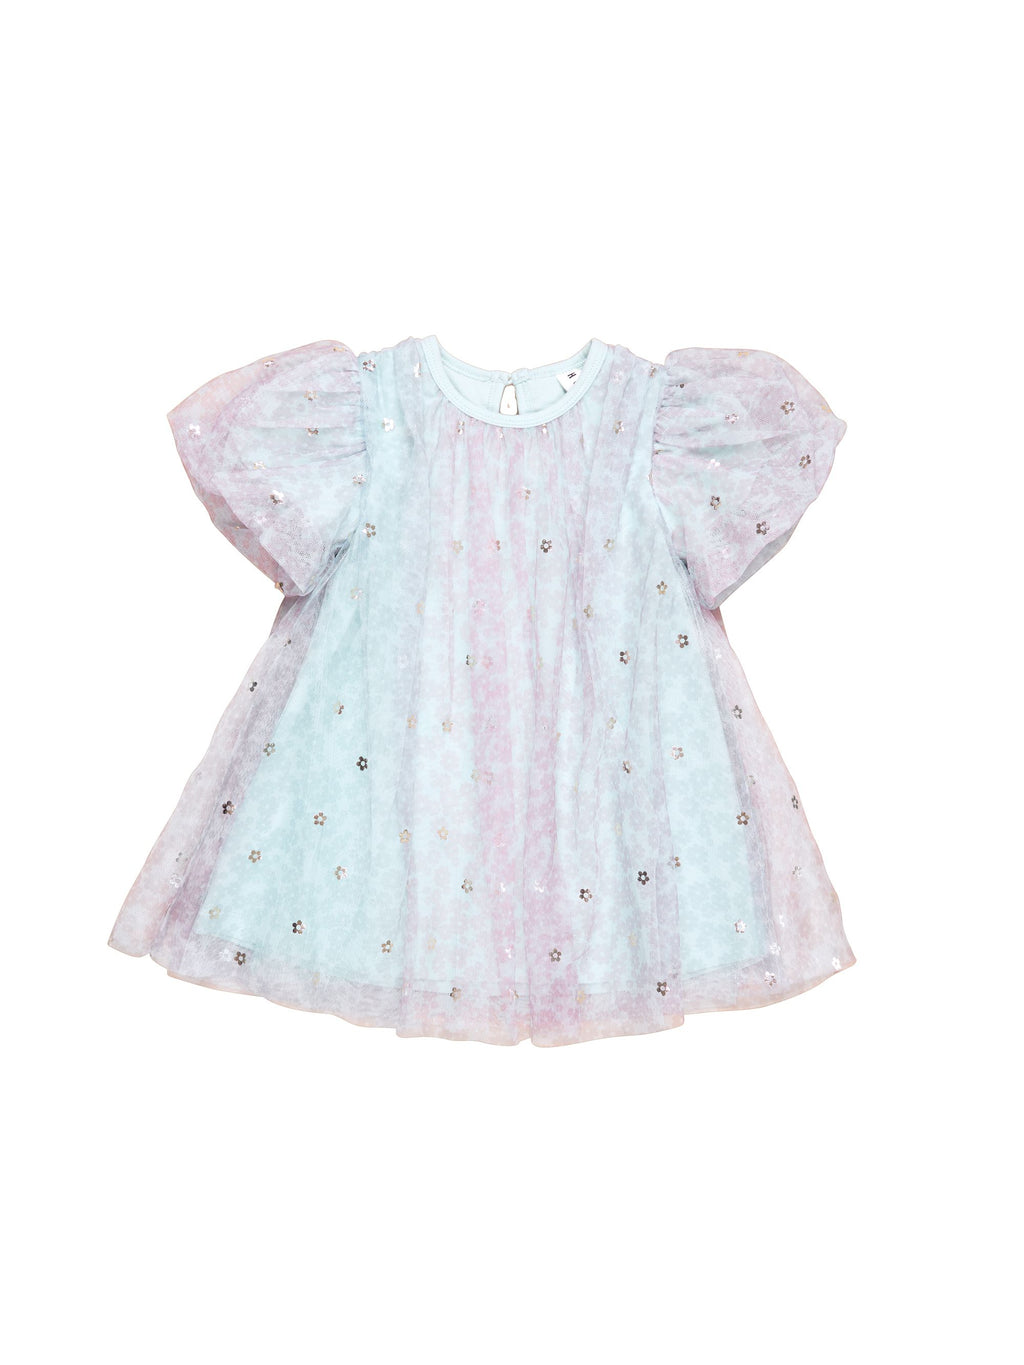 Huxbaby Party Dress - Rainbow Flower Tulle